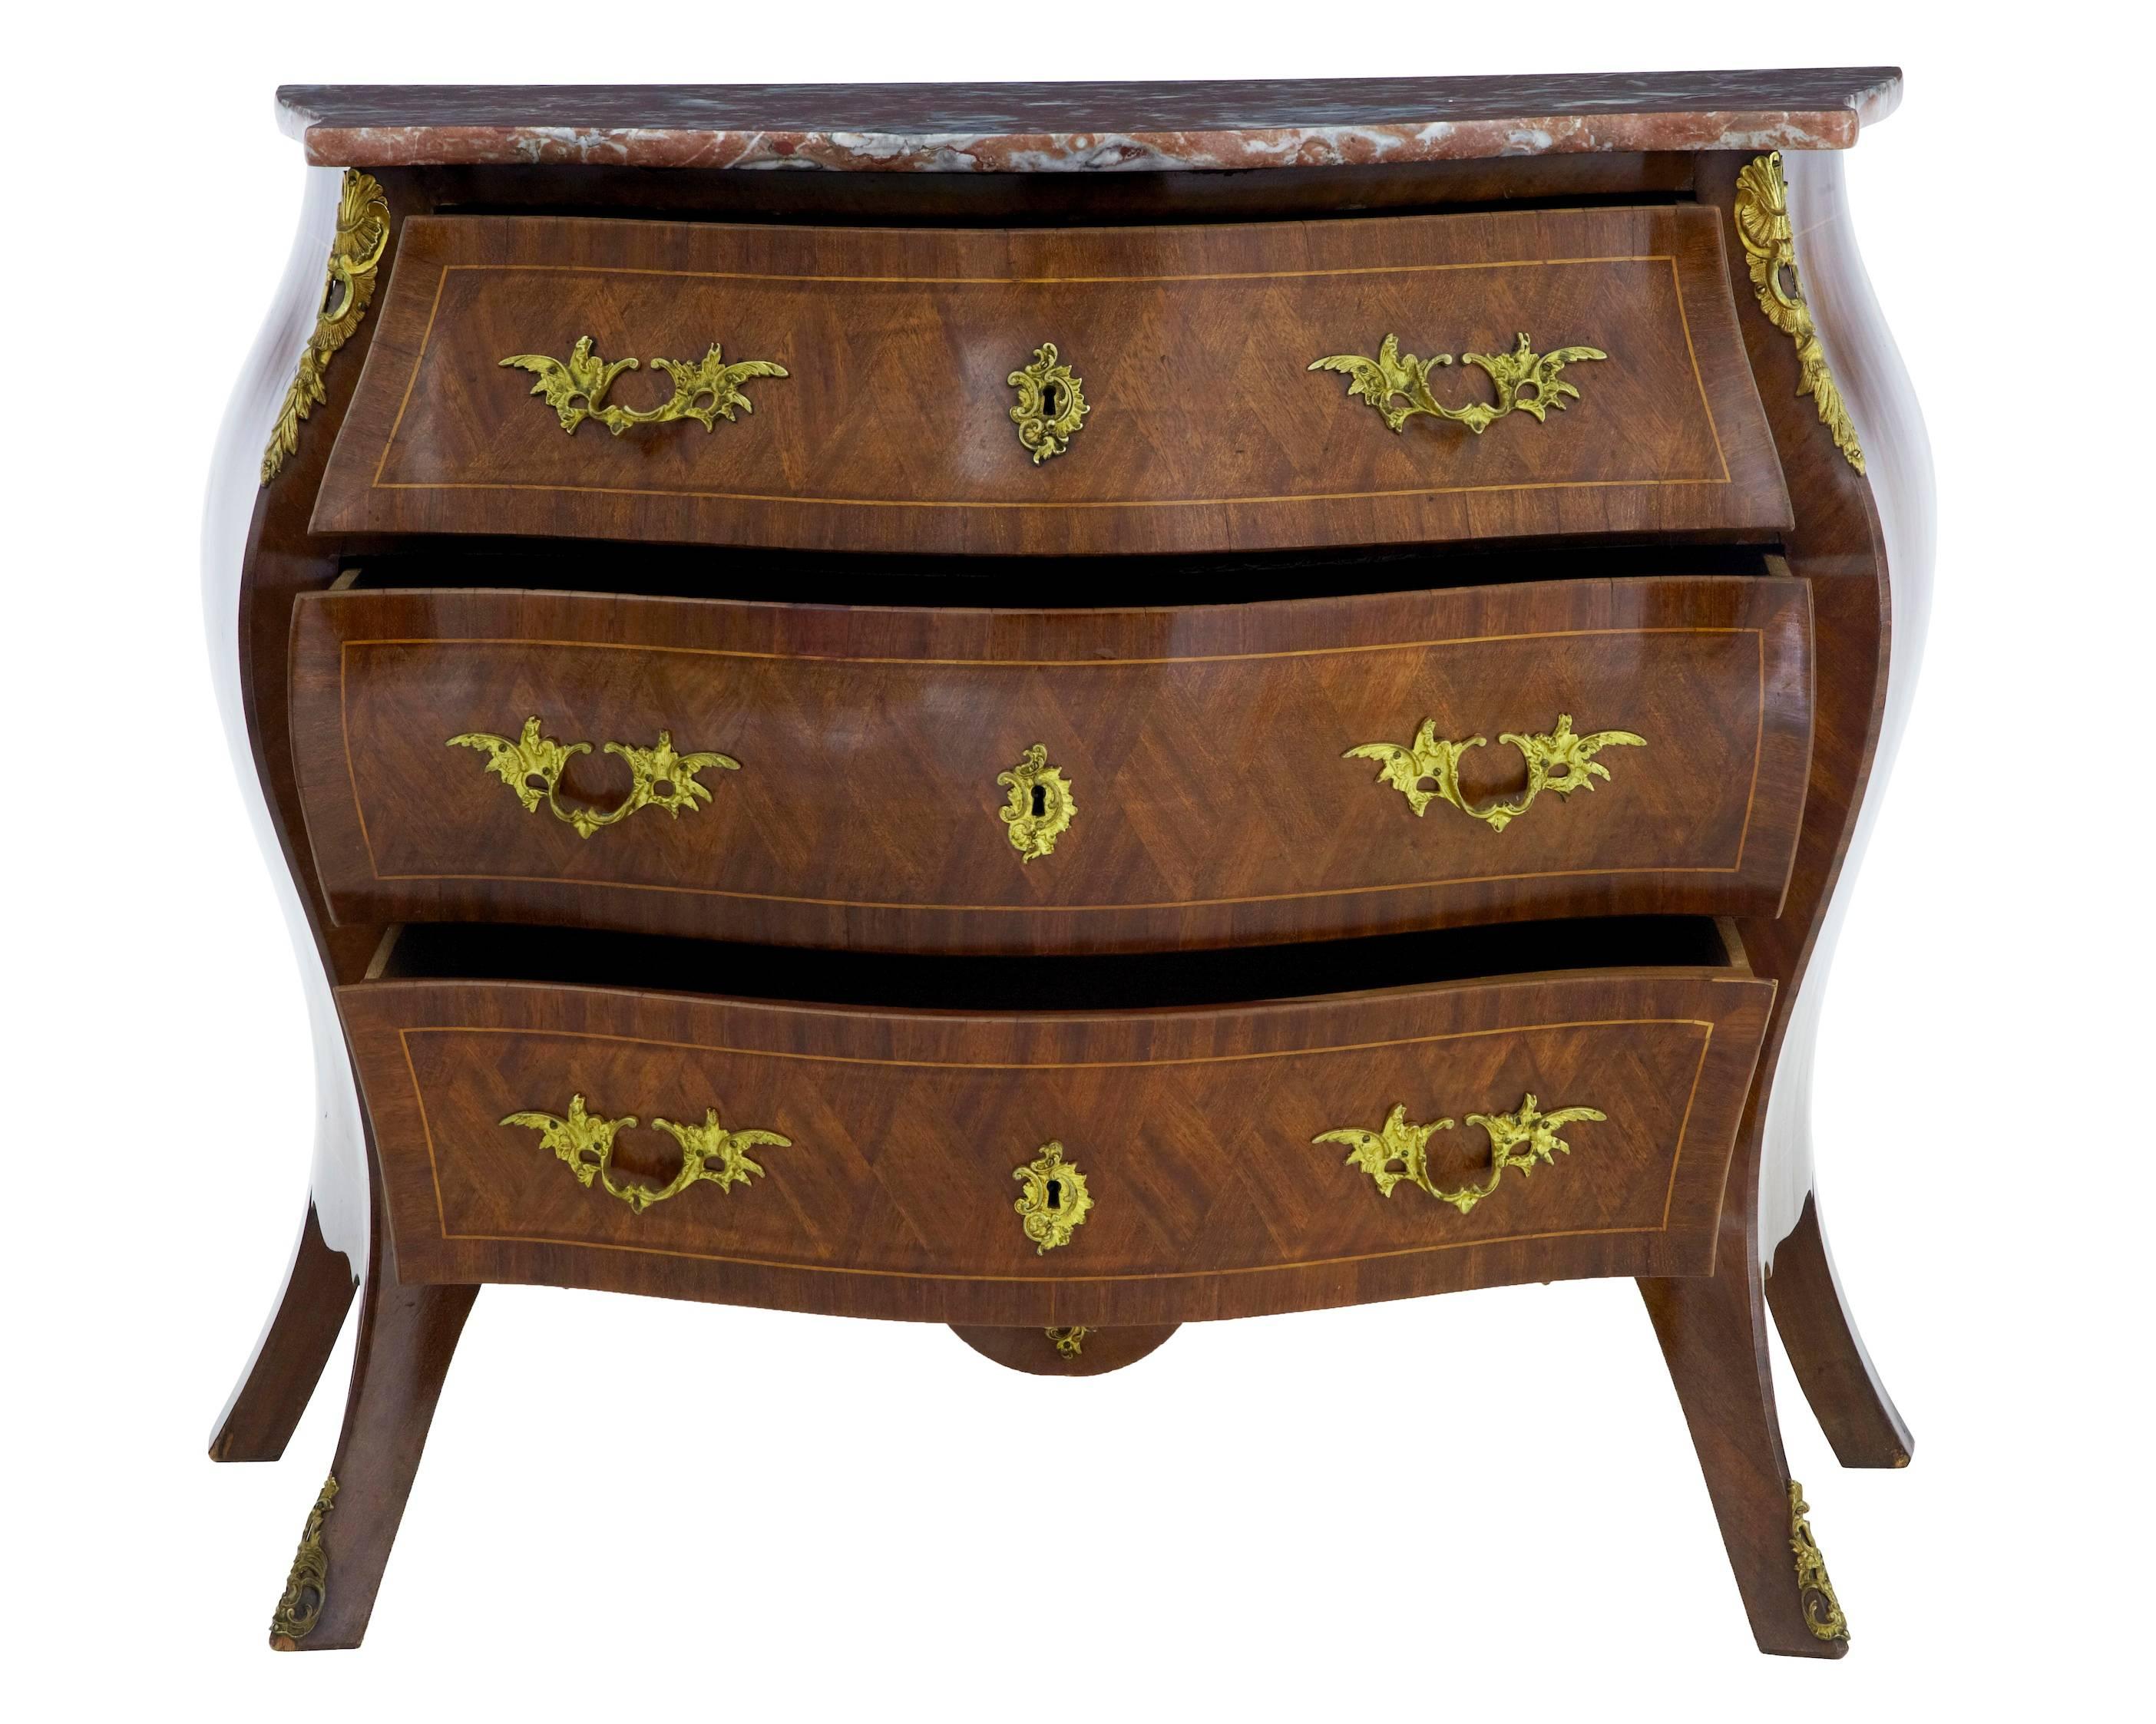 Good quality bombe shape commode, circa 1950.
Three drawers with ornate handles.
Inlaid and crossbanded with kingwood and mahogany, strung with satinwood.
Marble-top.
Oak lined drawers.
Minor marks to side.
 